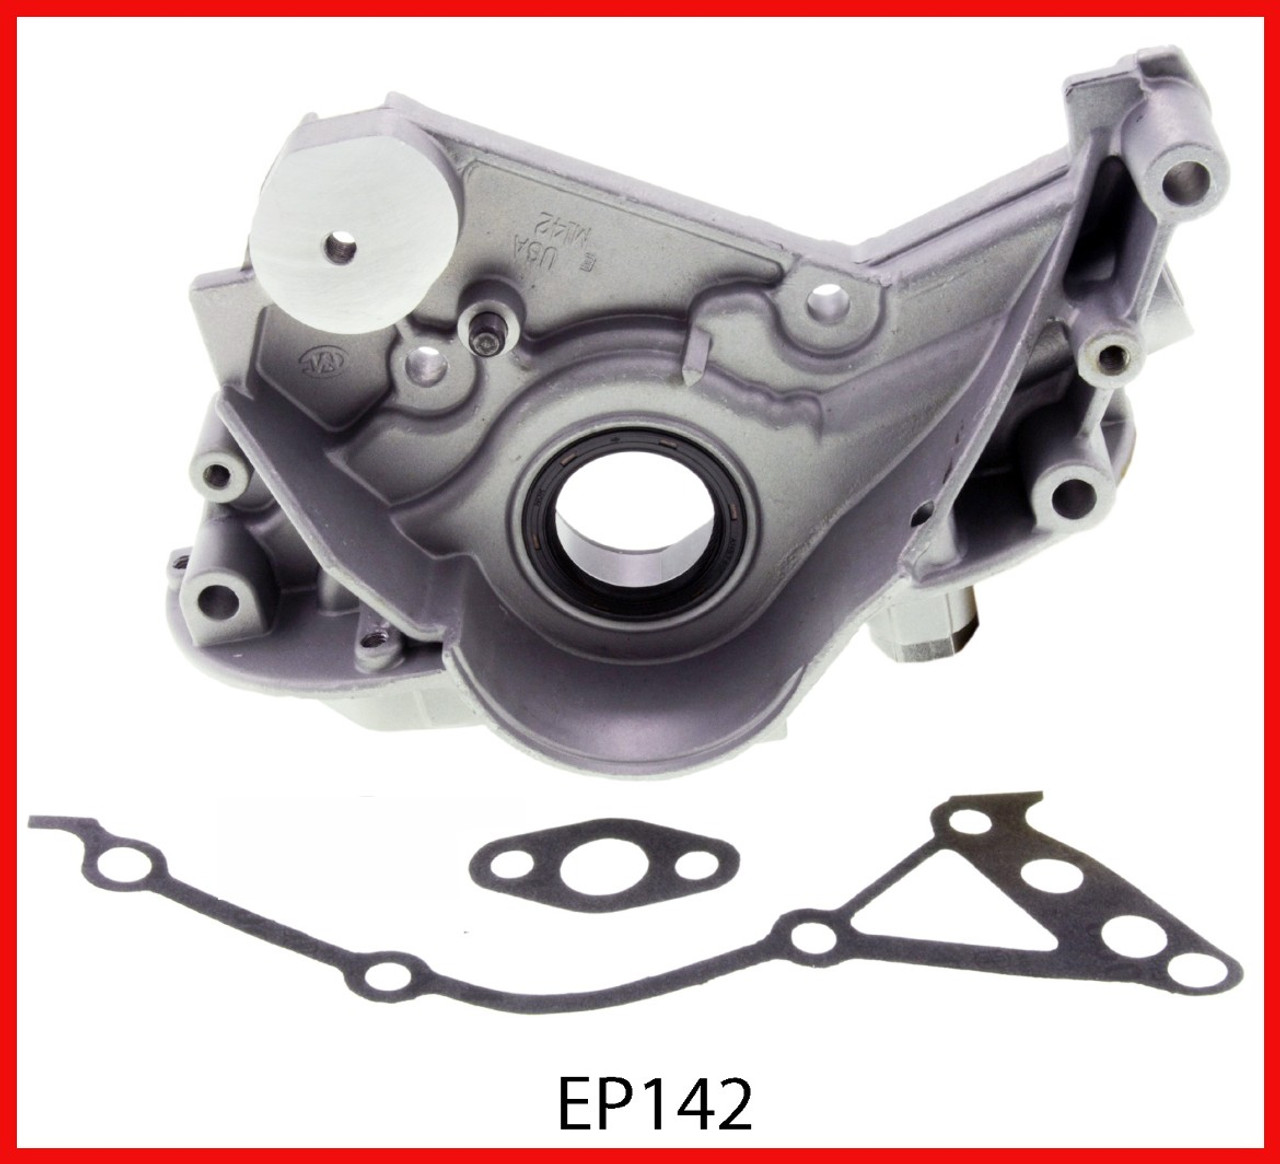 1999 Plymouth Grand Voyager 3.0L Engine Oil Pump EP142 -91